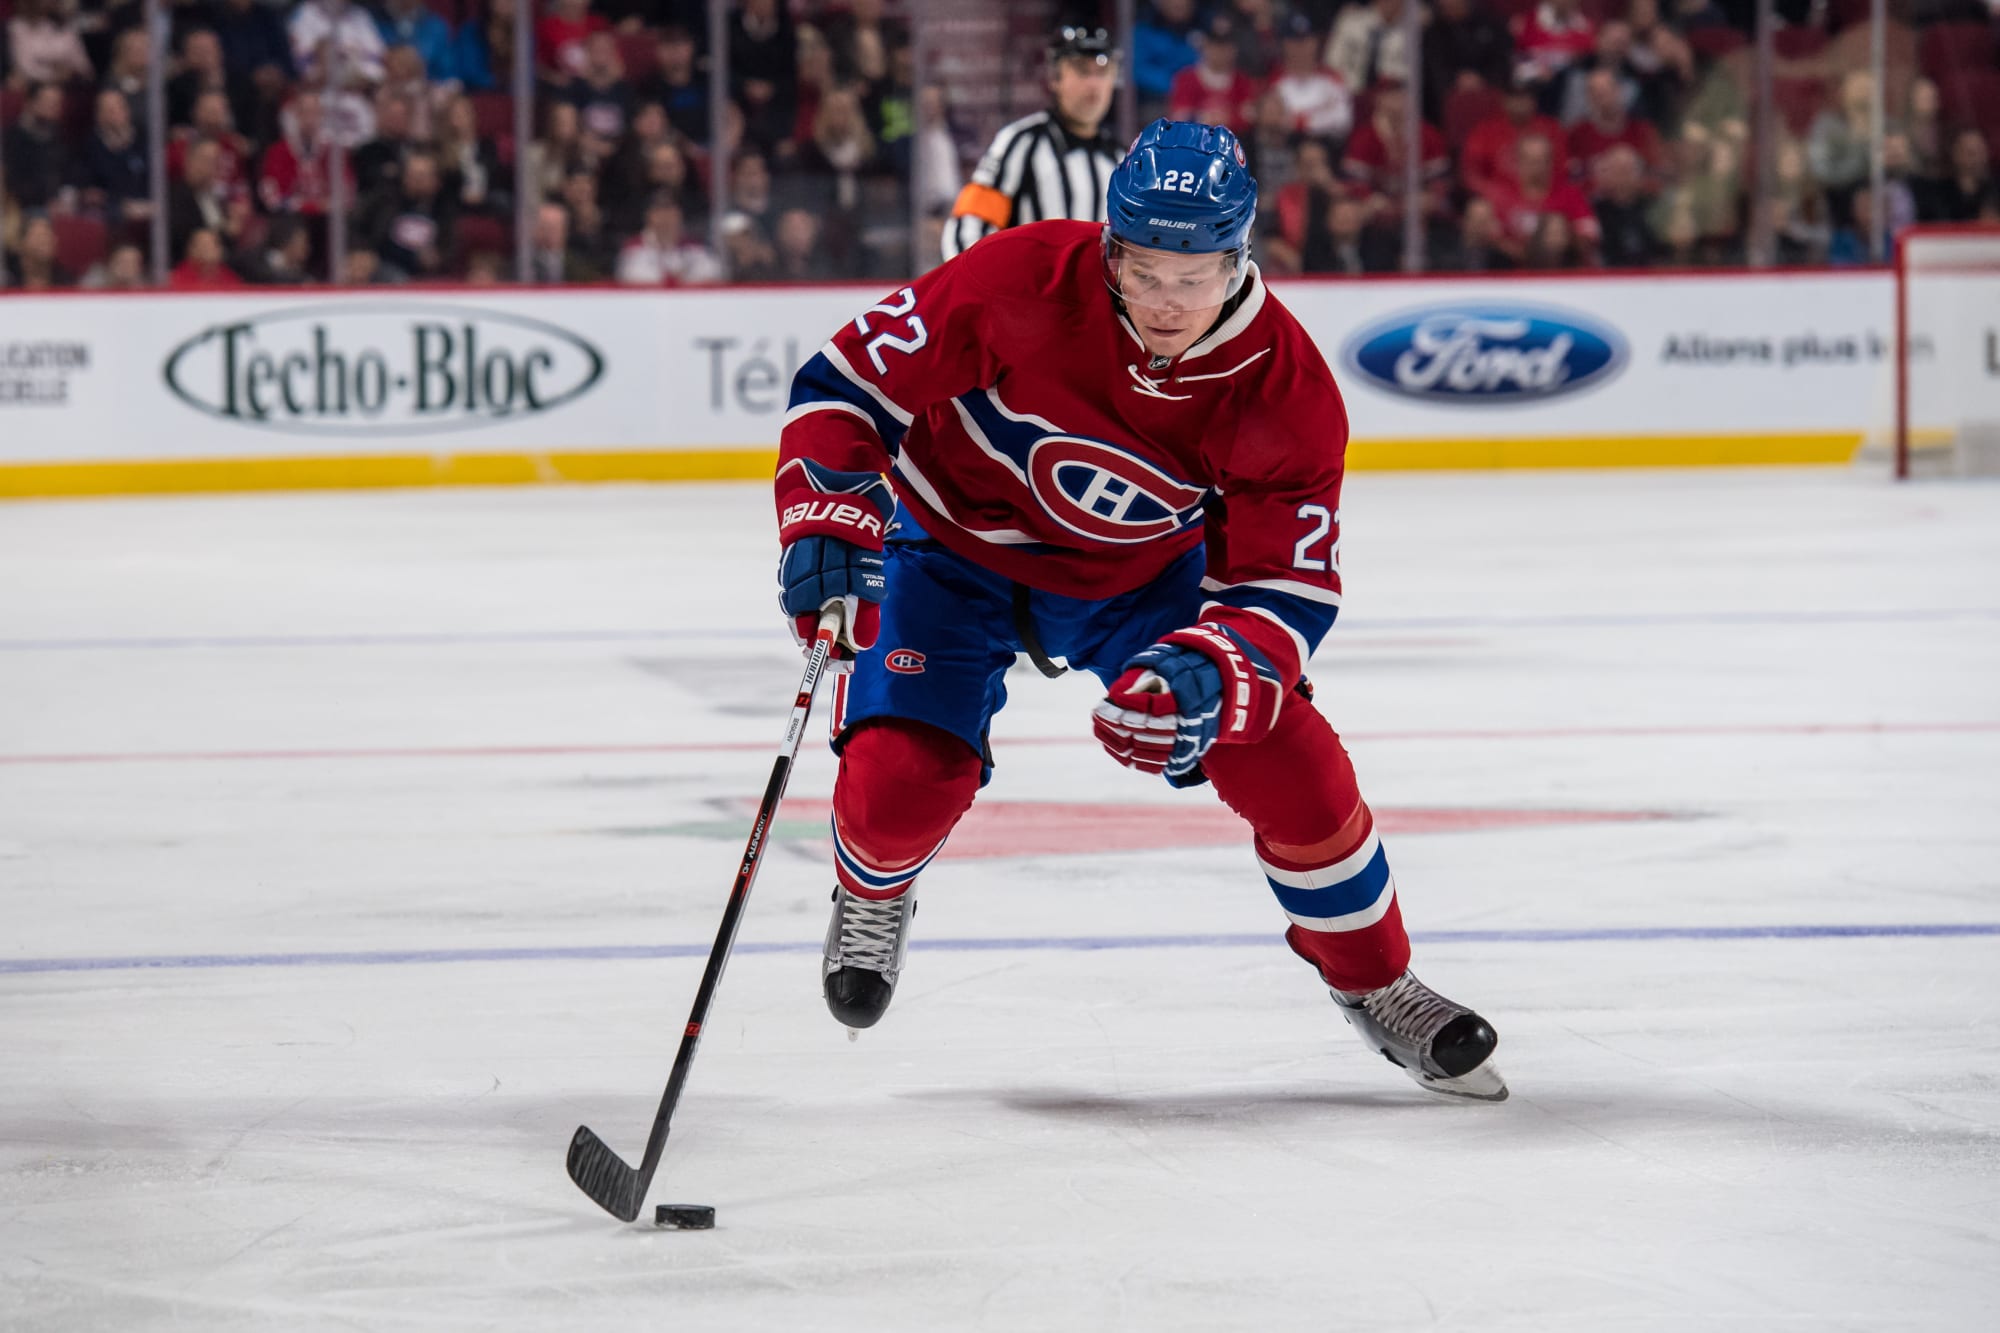 Canadiens expected to shop for a top-four defenceman and send down Sergachev